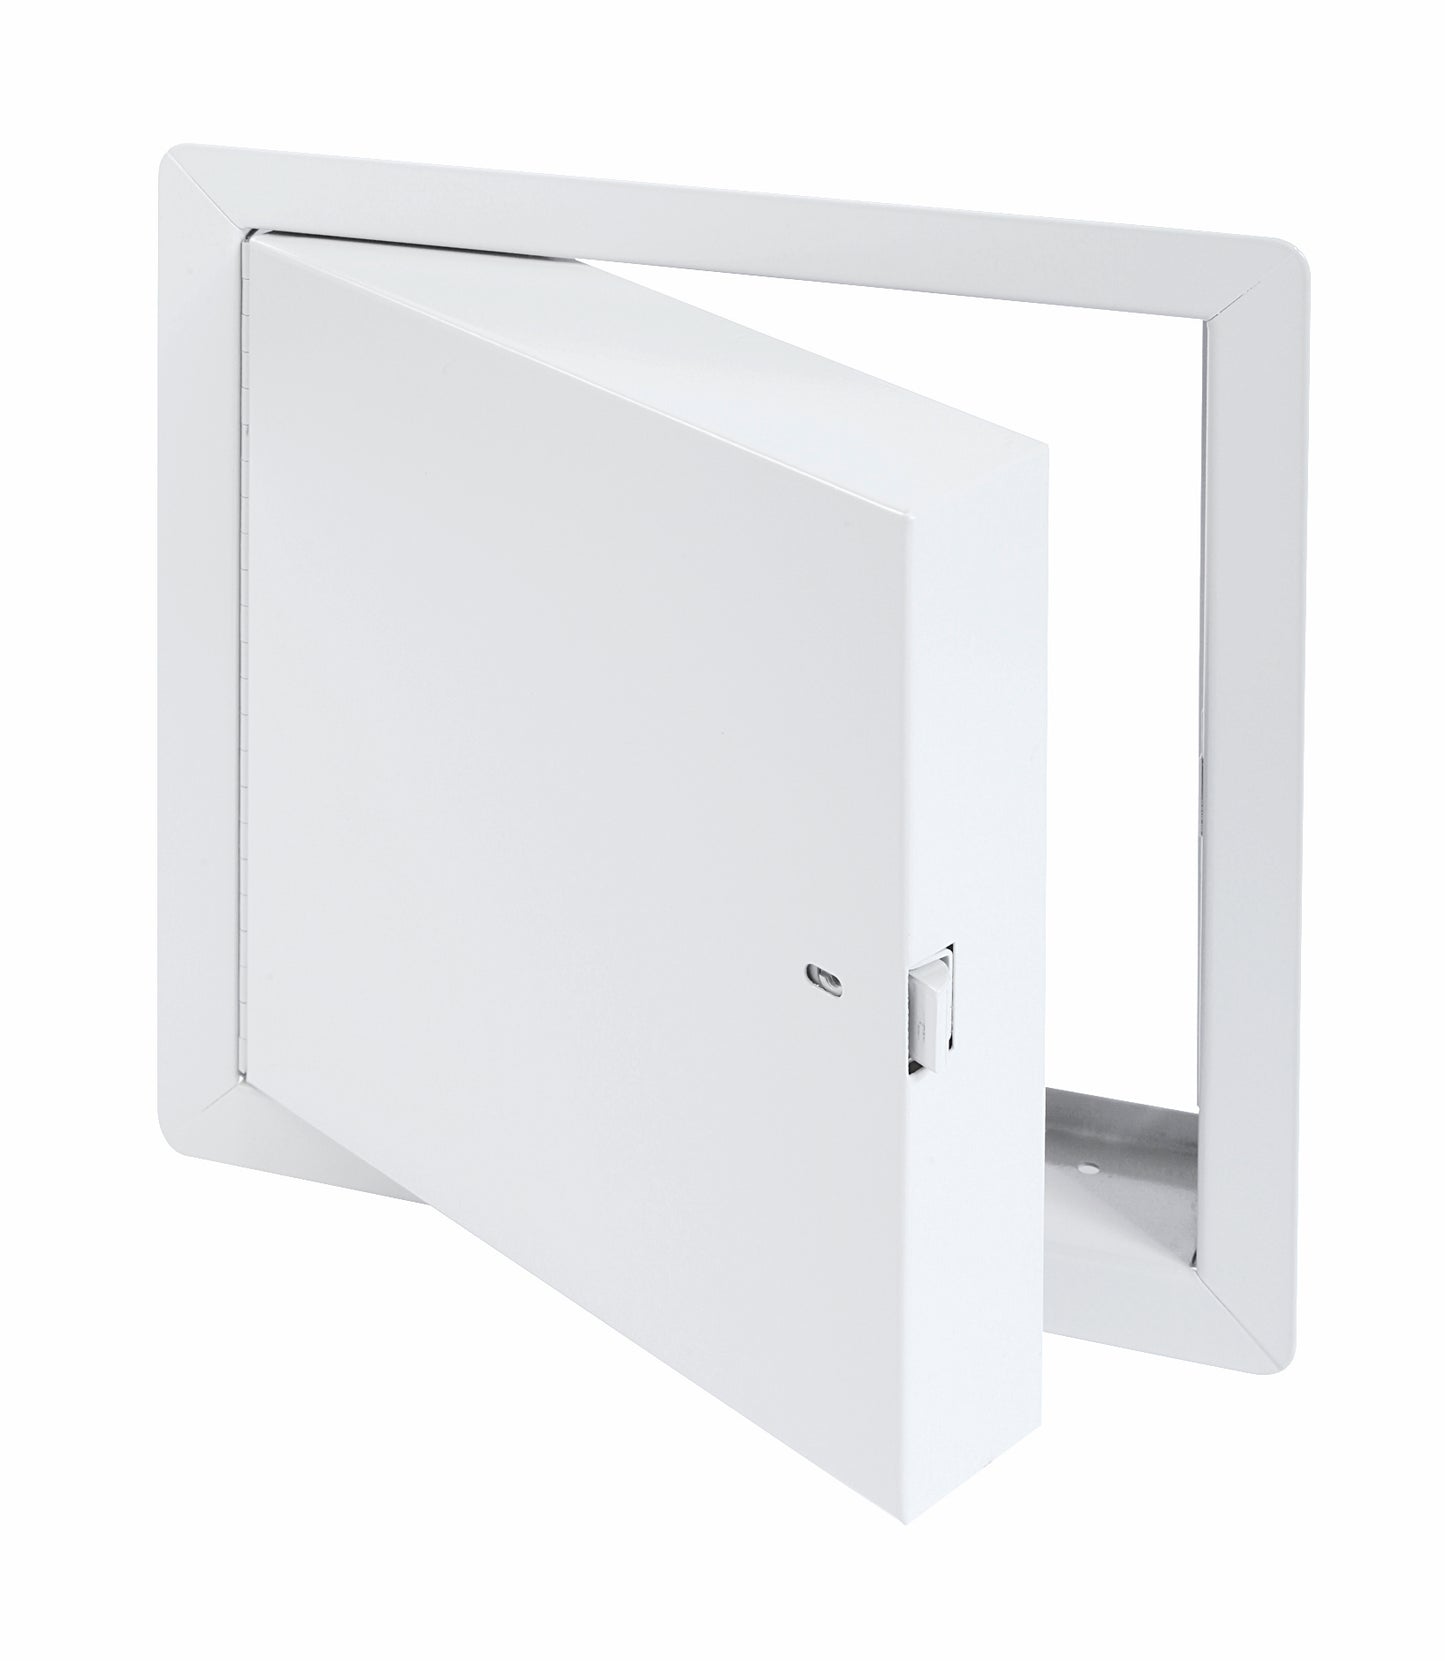 24"x24" Fire-rated Insulated Access Door with Exposed Flange, Cendrex